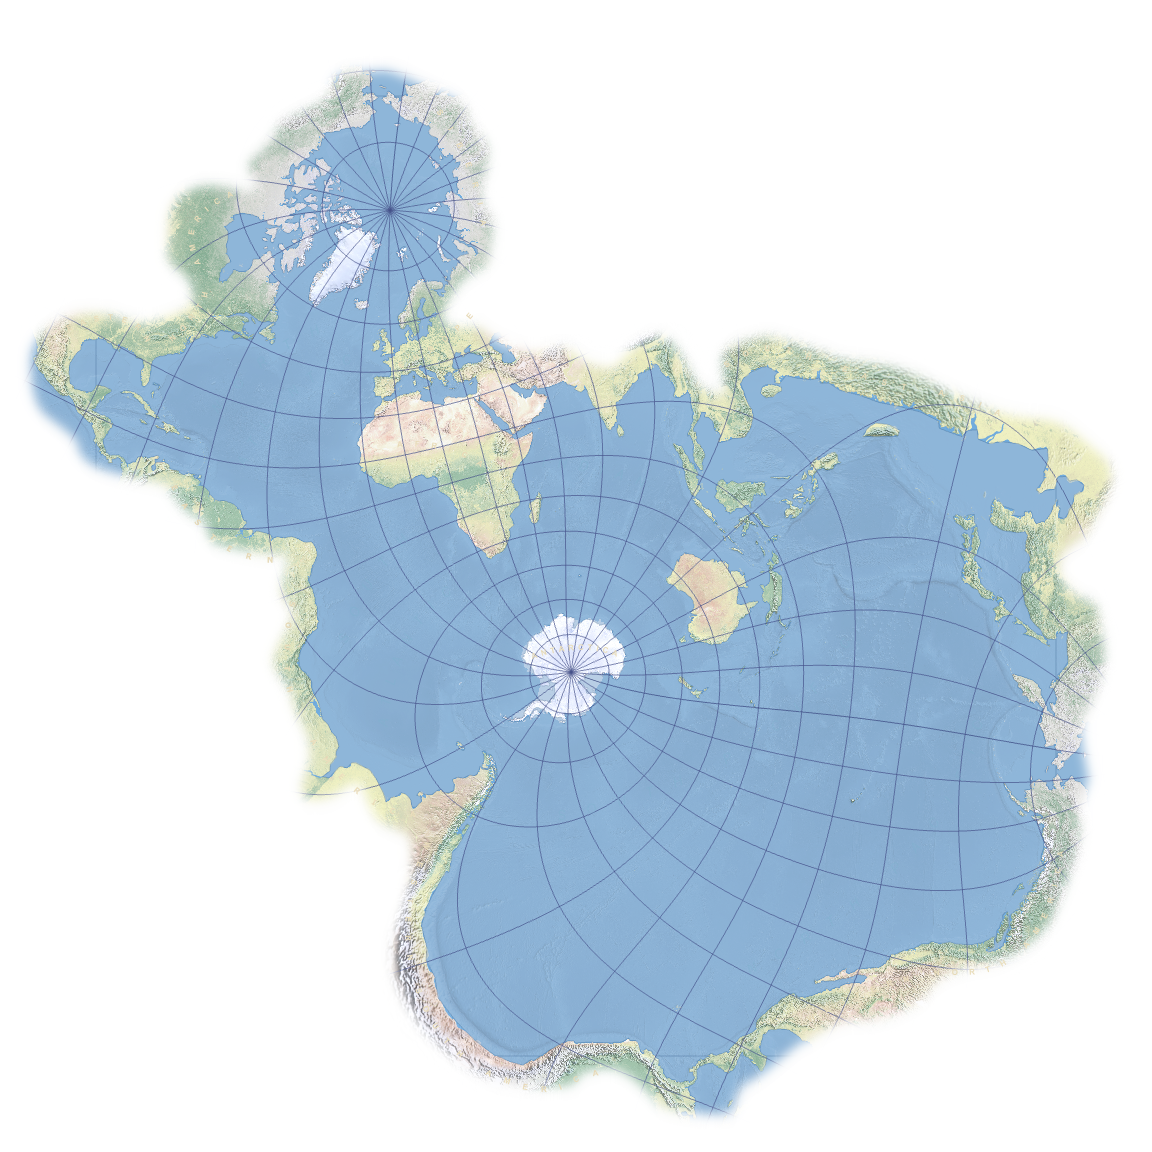 Ocean In The World Map The Spilhaus World Ocean Map in a Square